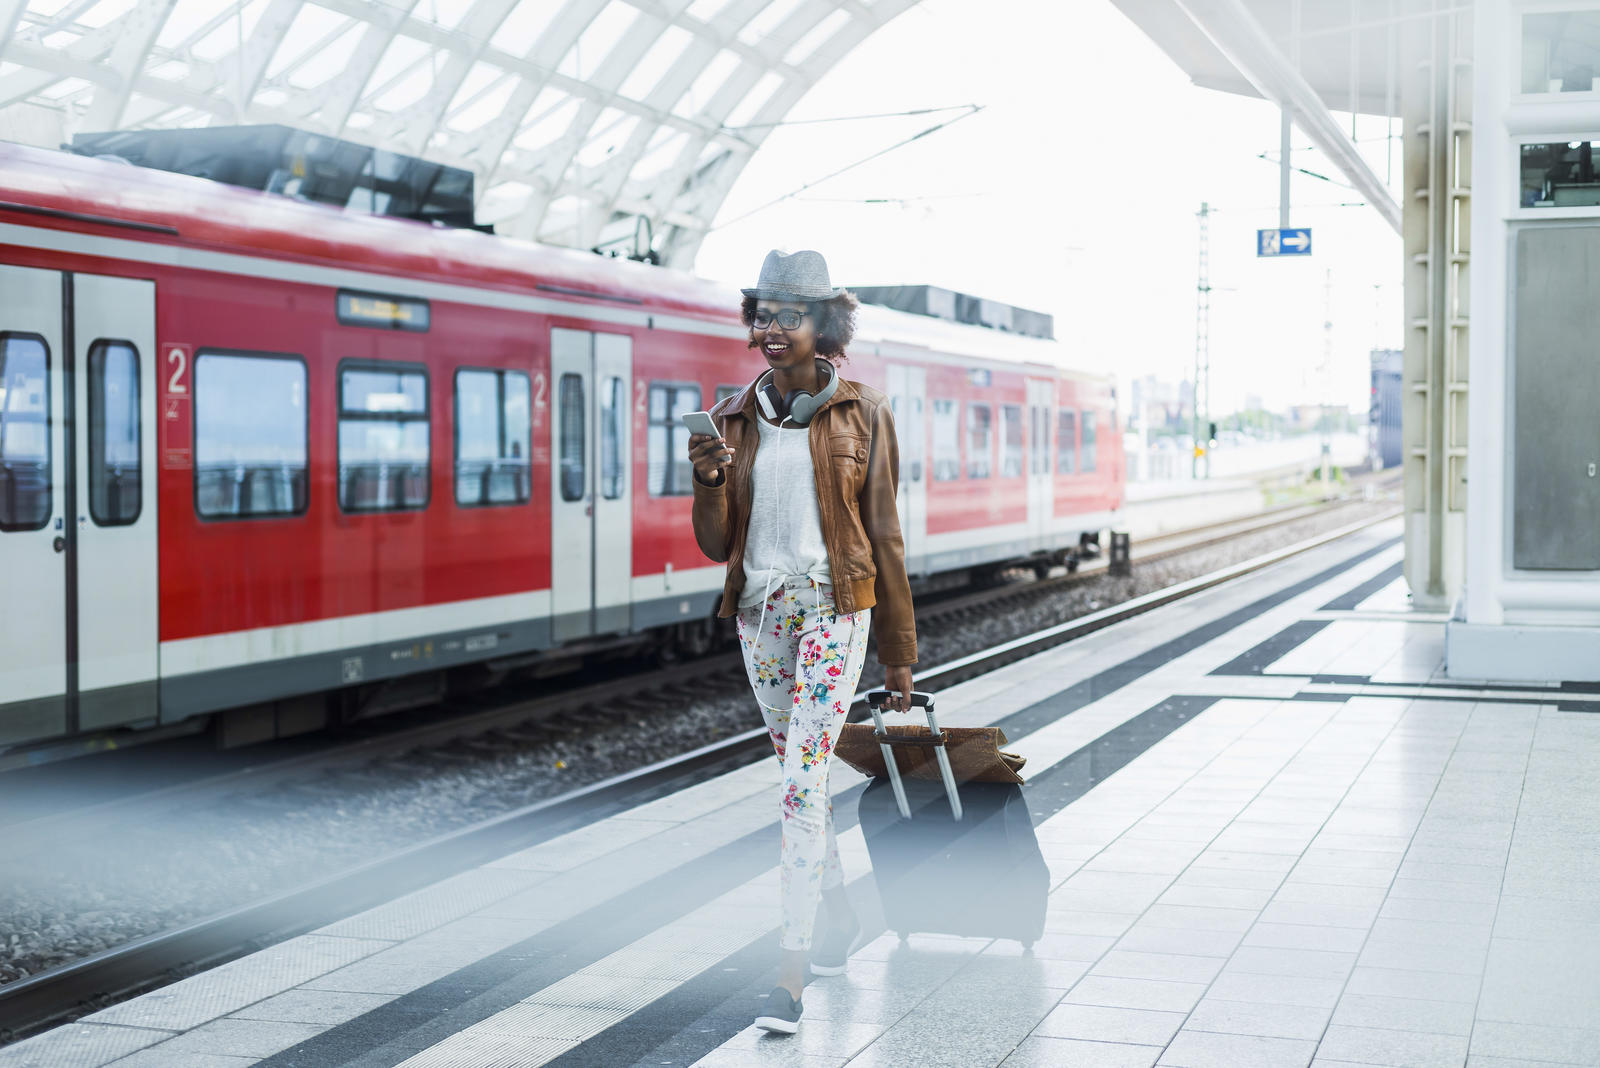 Digital Mobility - Uniting Solutions for Transit Needs of Tomorrow